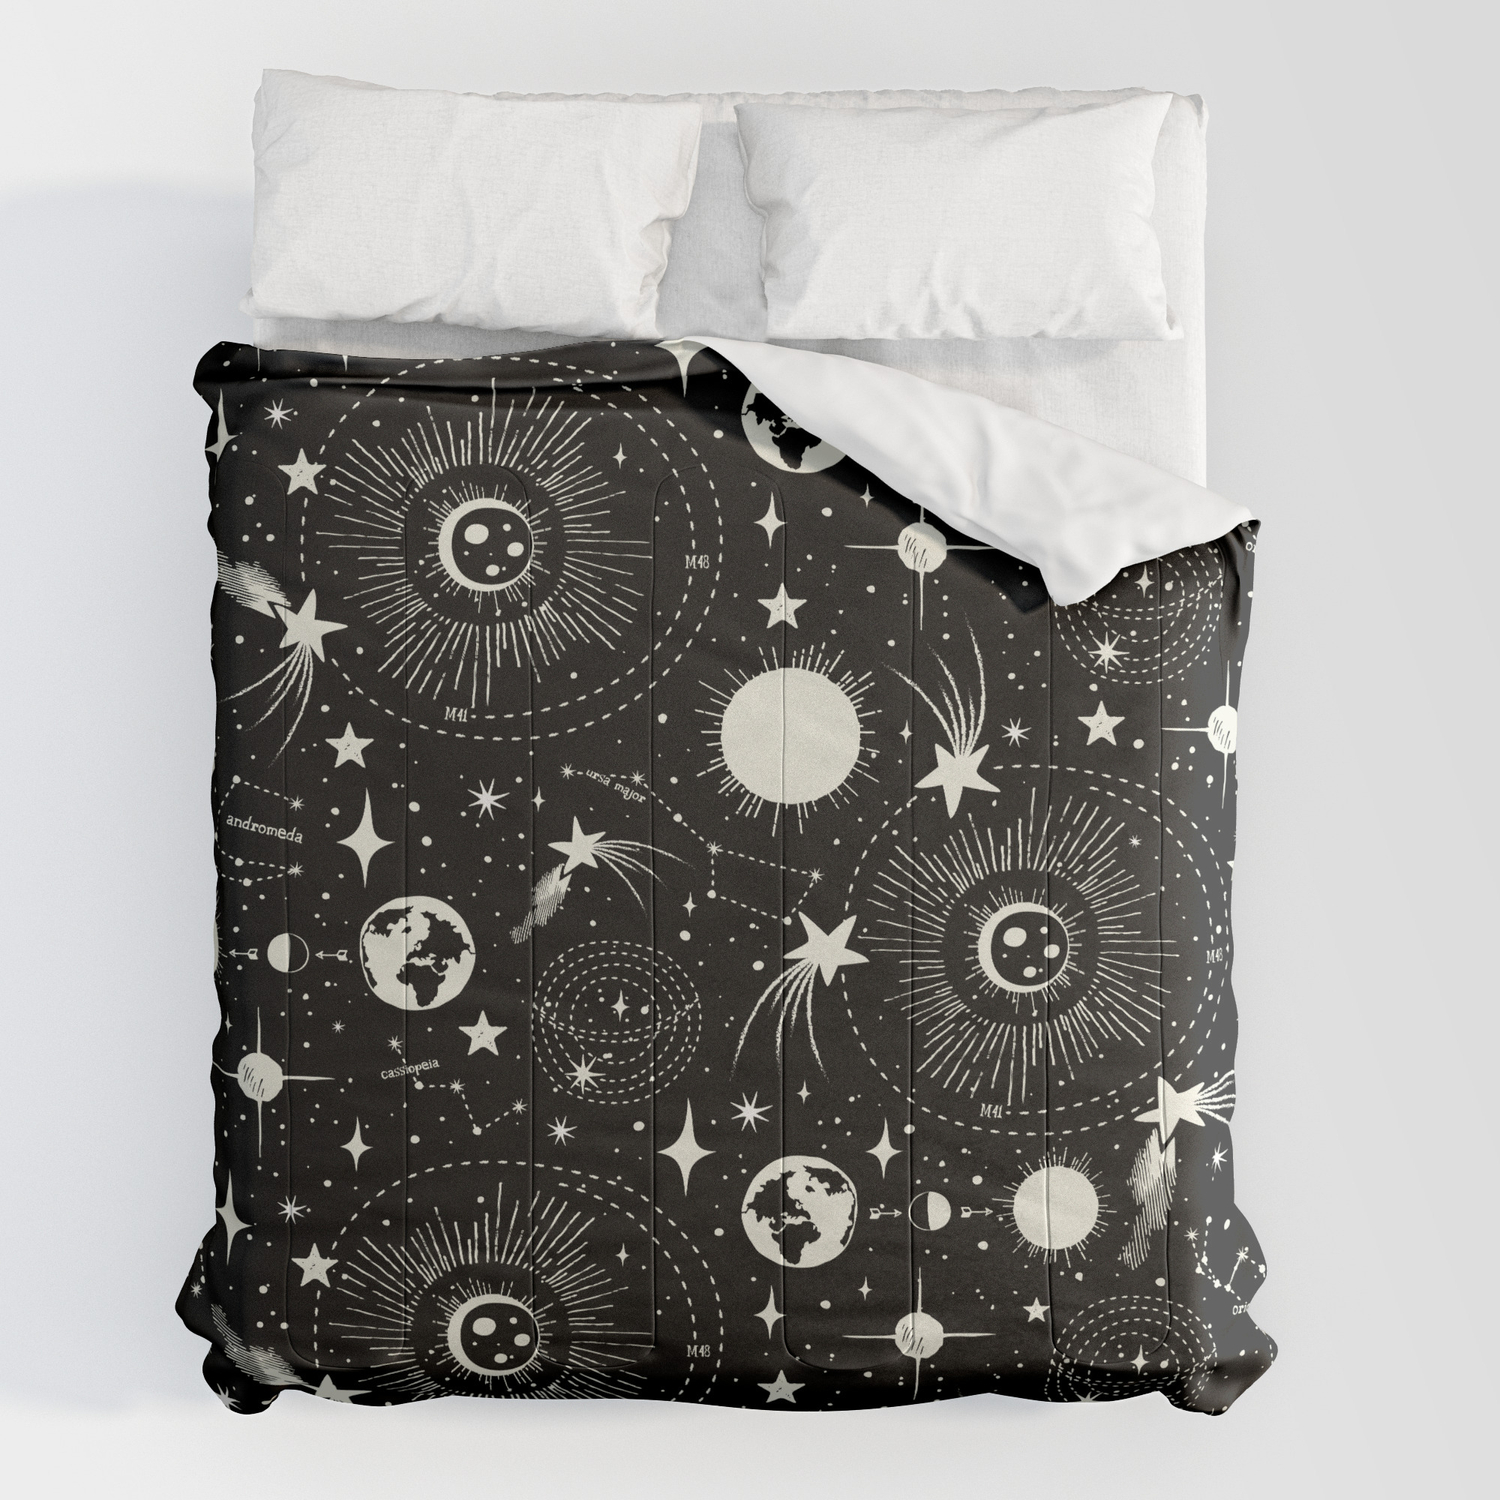 Solar System by Heather Dutton on Throw Pillow